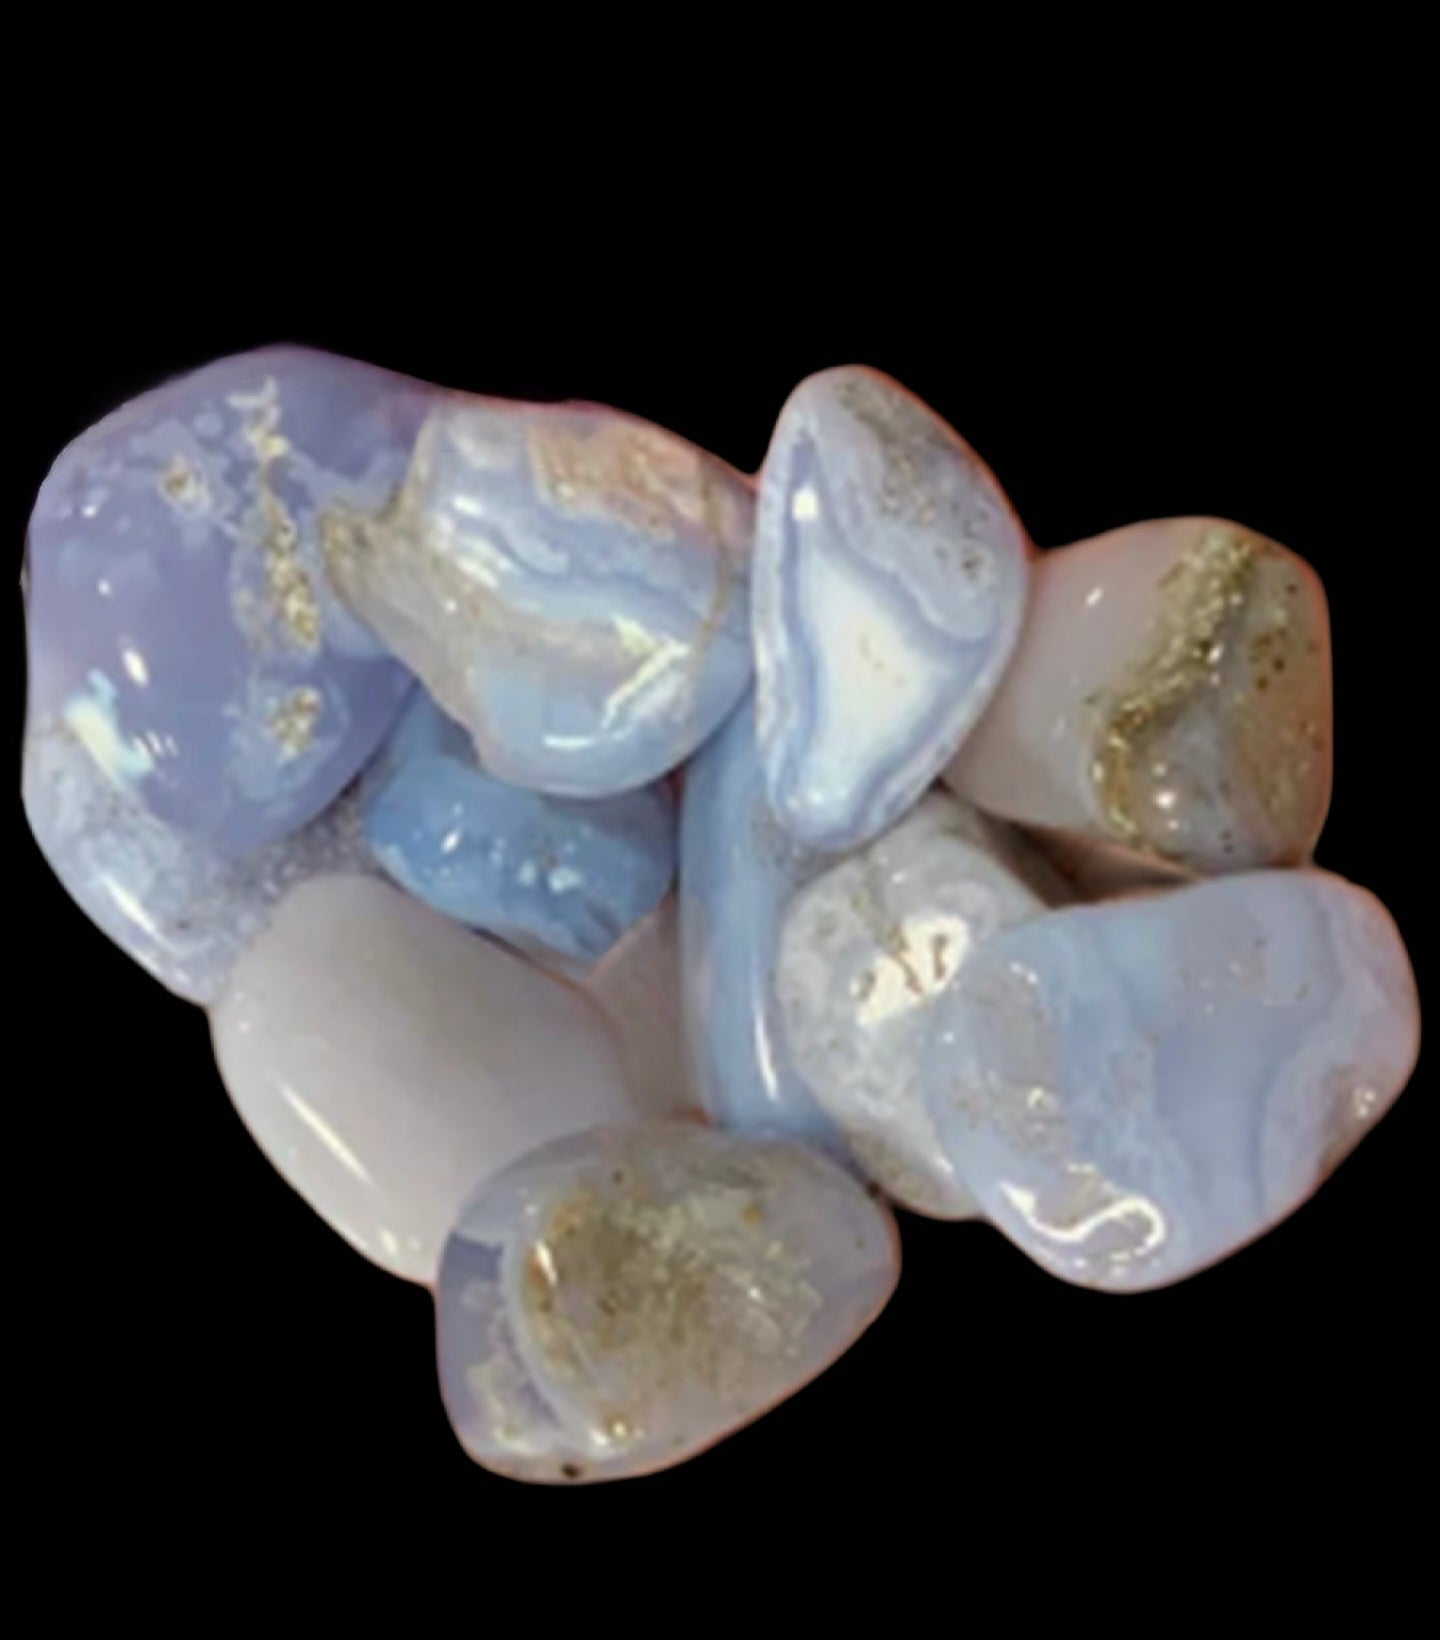 Blue Lace Agate Tumbled Stone for Crown Chakra, Energy